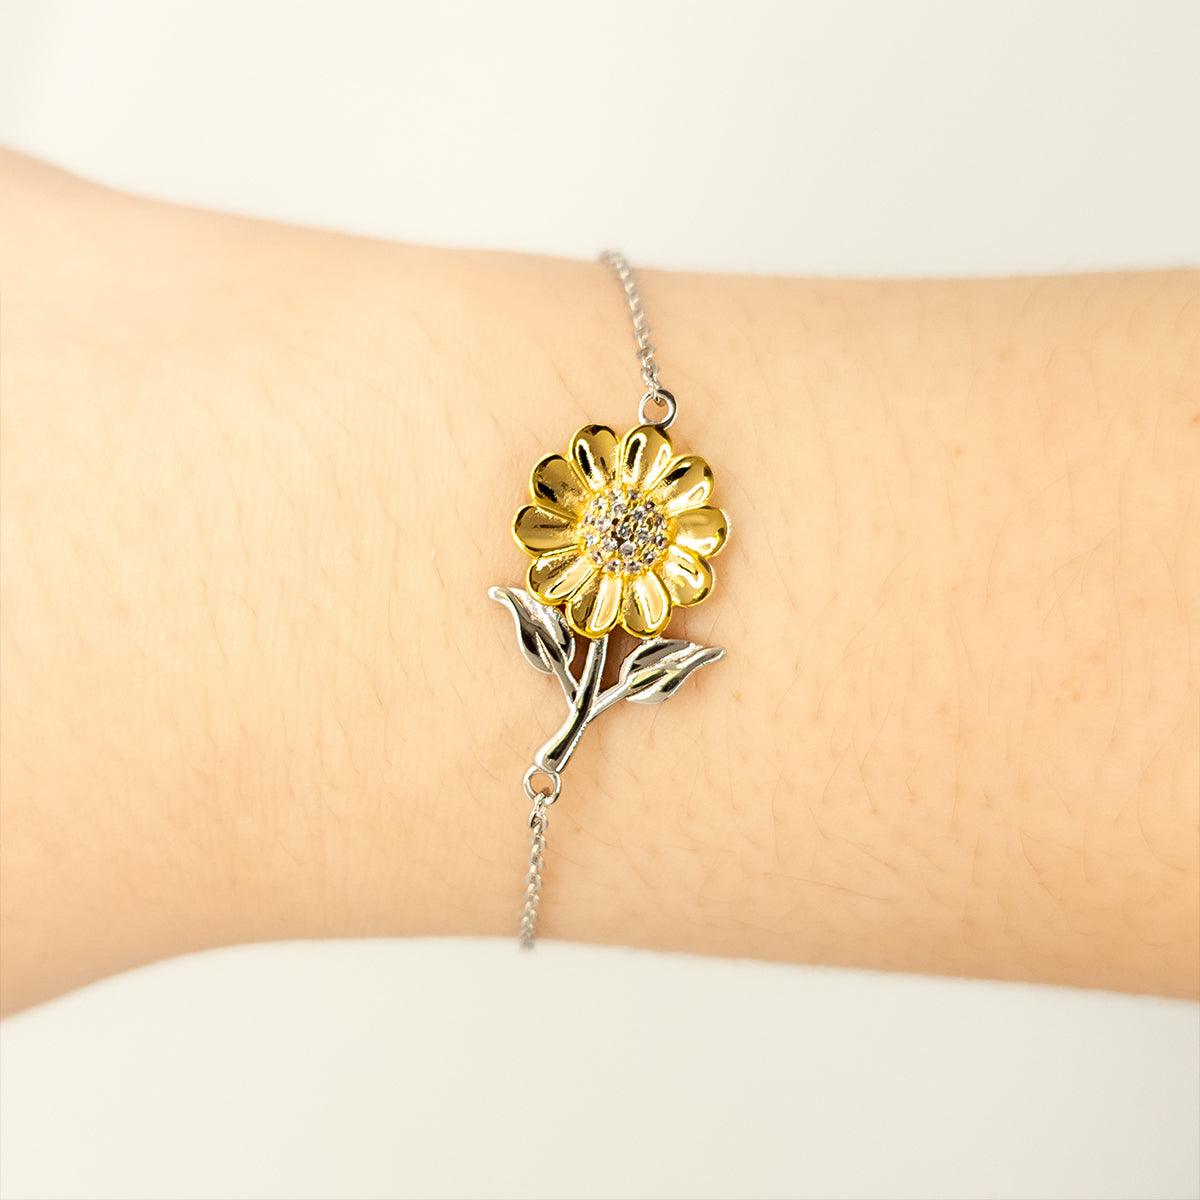 Sarcastic Carpenter Sunflower Bracelet Gifts, Christmas Holiday Gifts for Carpenter Birthday Message Card, Carpenter: Because greatness is woven into the fabric of every day, Coworkers, Friends - Mallard Moon Gift Shop